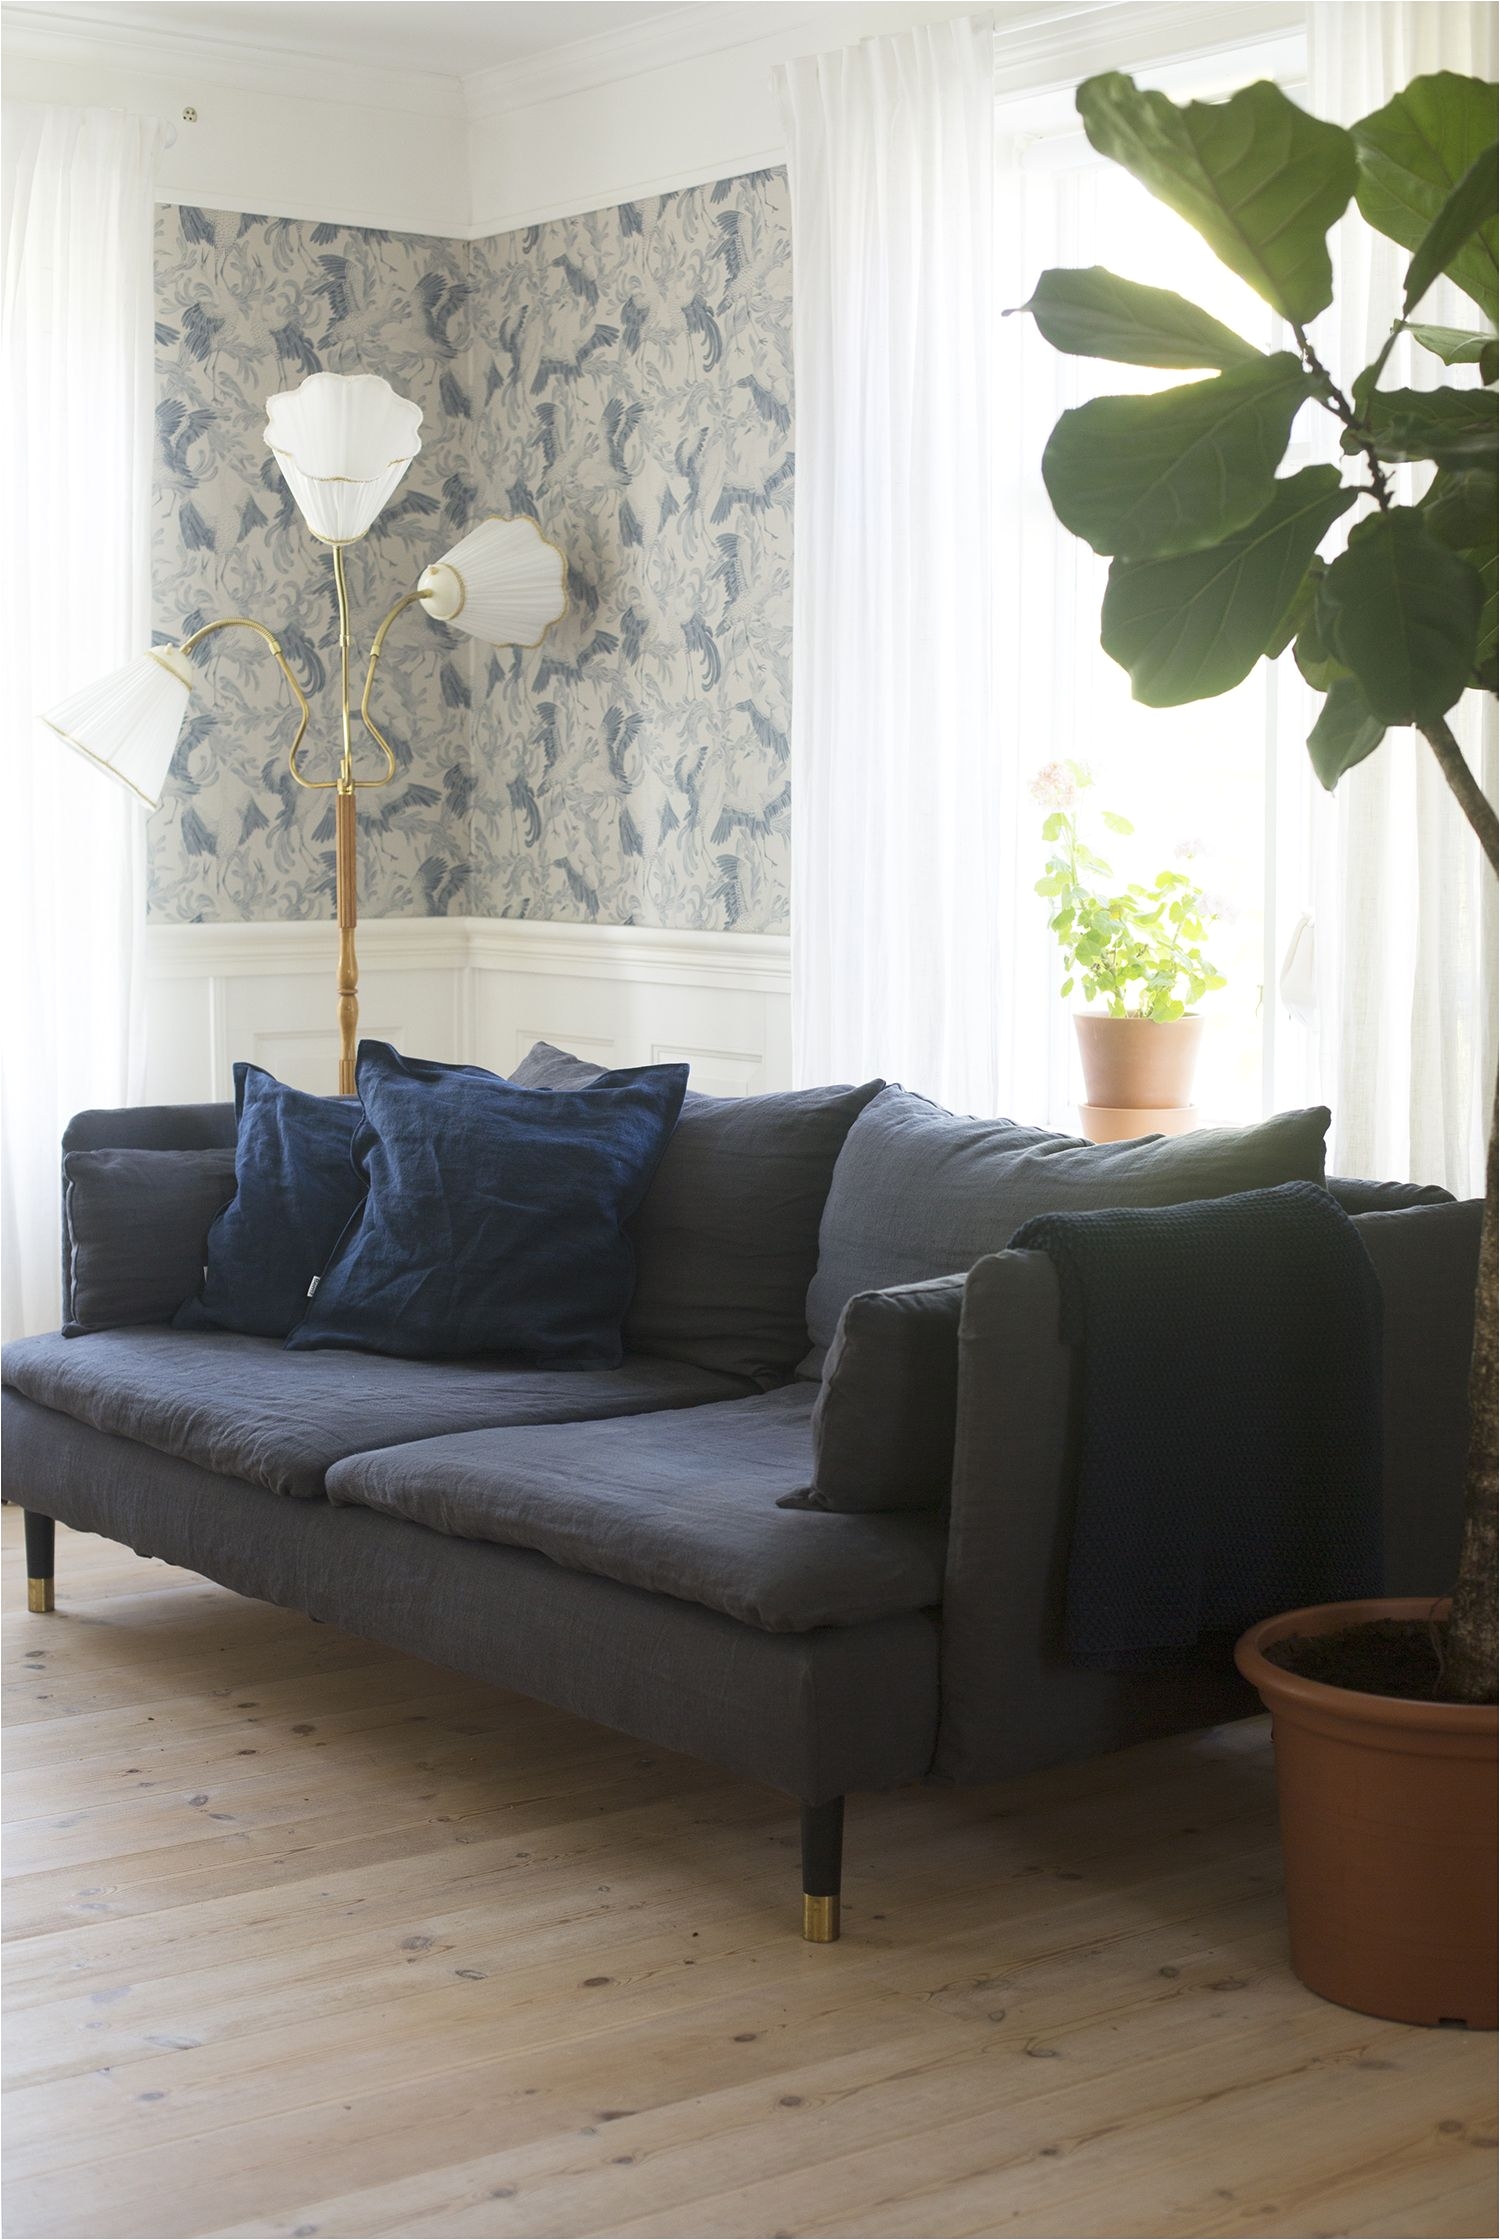 romantic vintage inspired living room with blue patterned wallpaper huge fiddle leaf tree and retro lamp dark grey linen sofa ikea sa¶derhamn sofa with